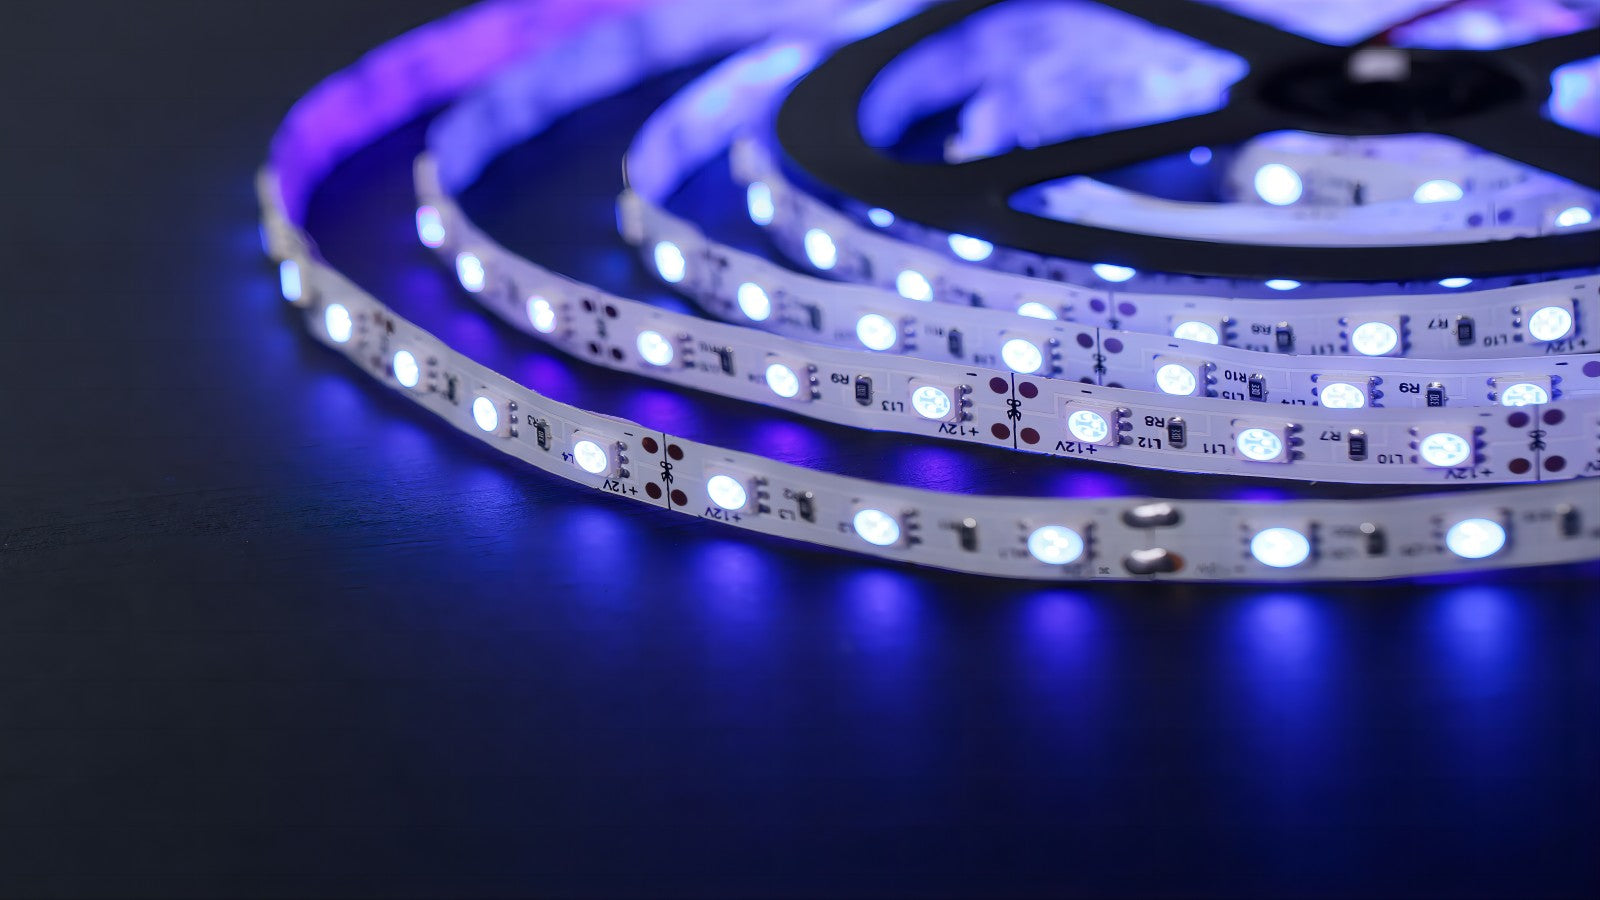 Things You Need to Know Before Buying LED Lighting Equipment